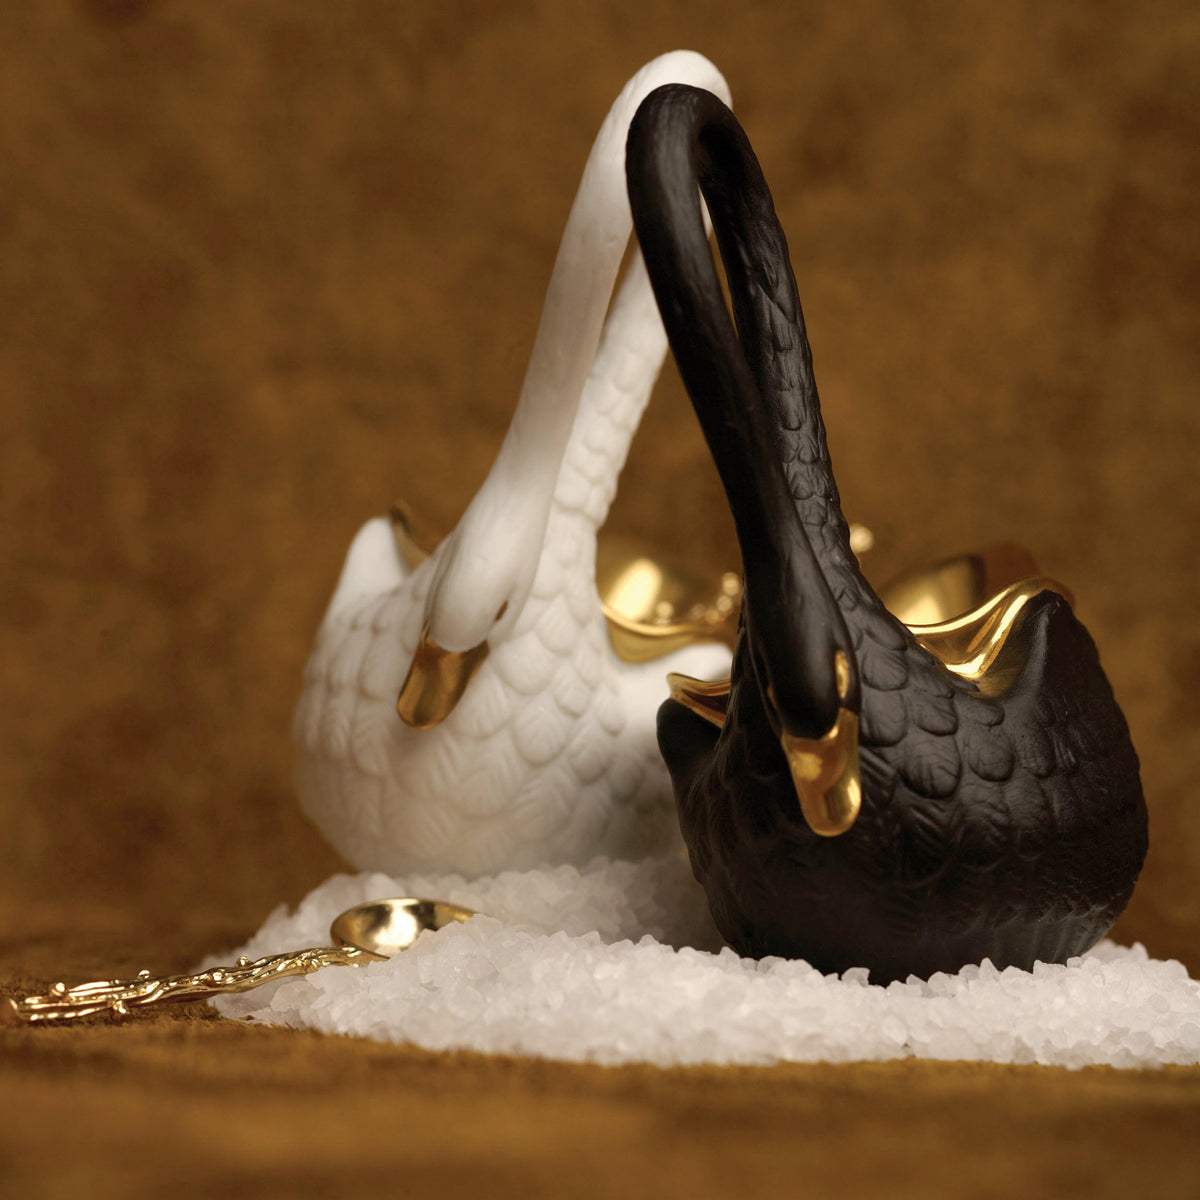 Swan Salt Cellar with 14K Gold Plated Spoon